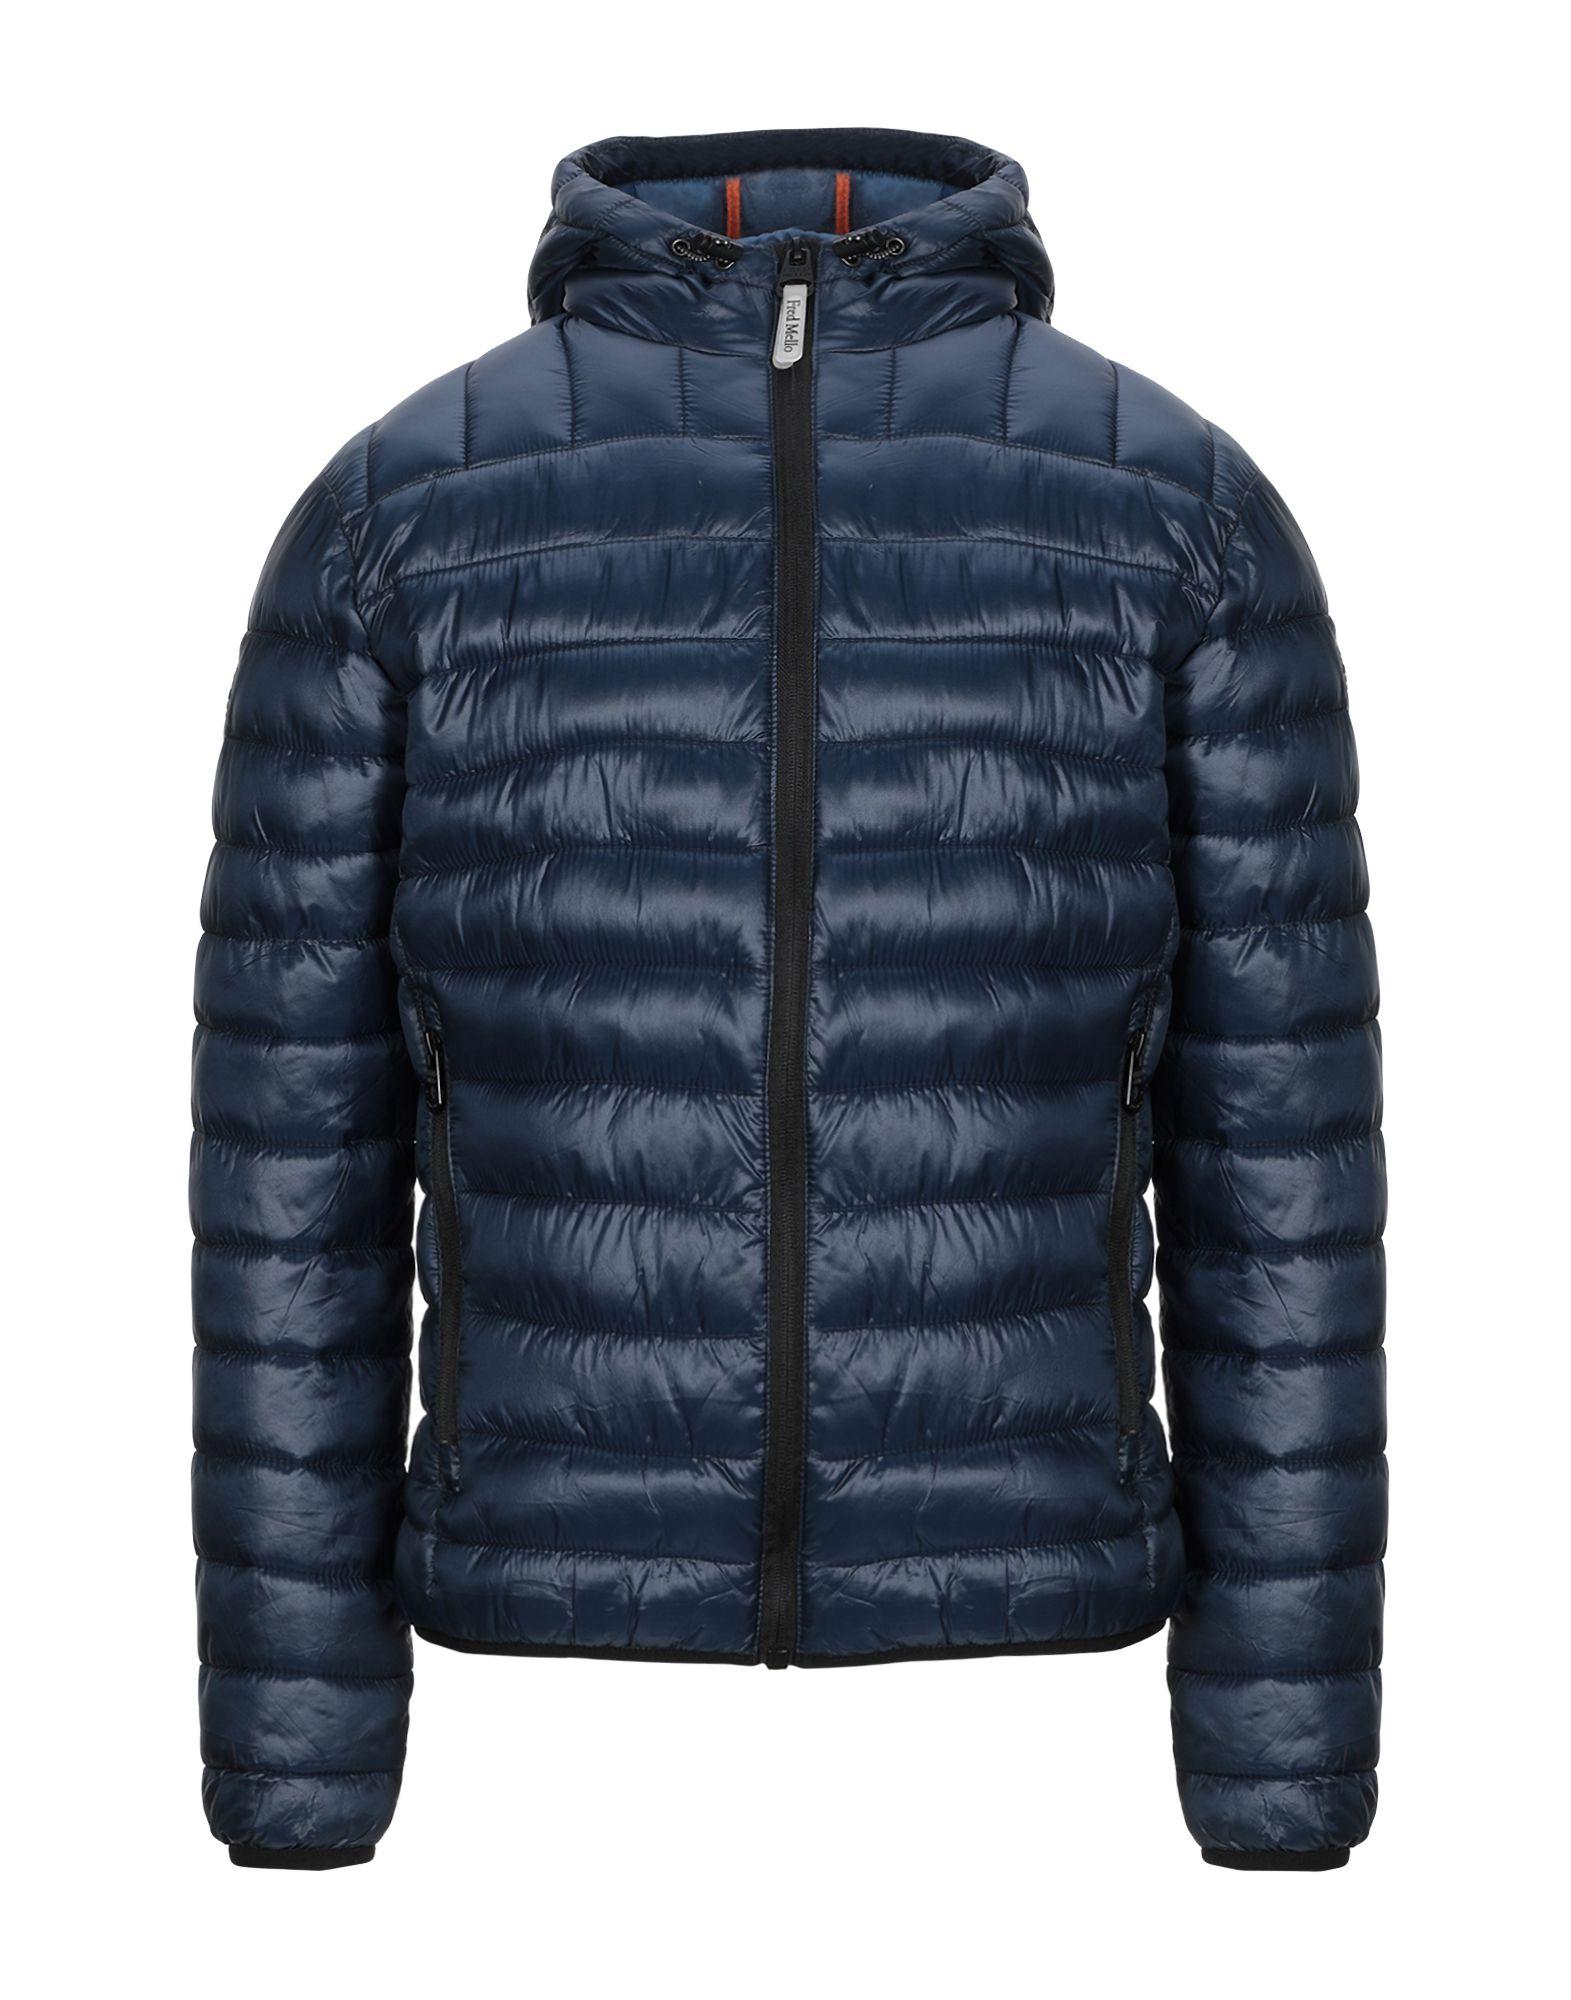 Fred Mello Synthetic Down Jacket in Blue for Men - Lyst